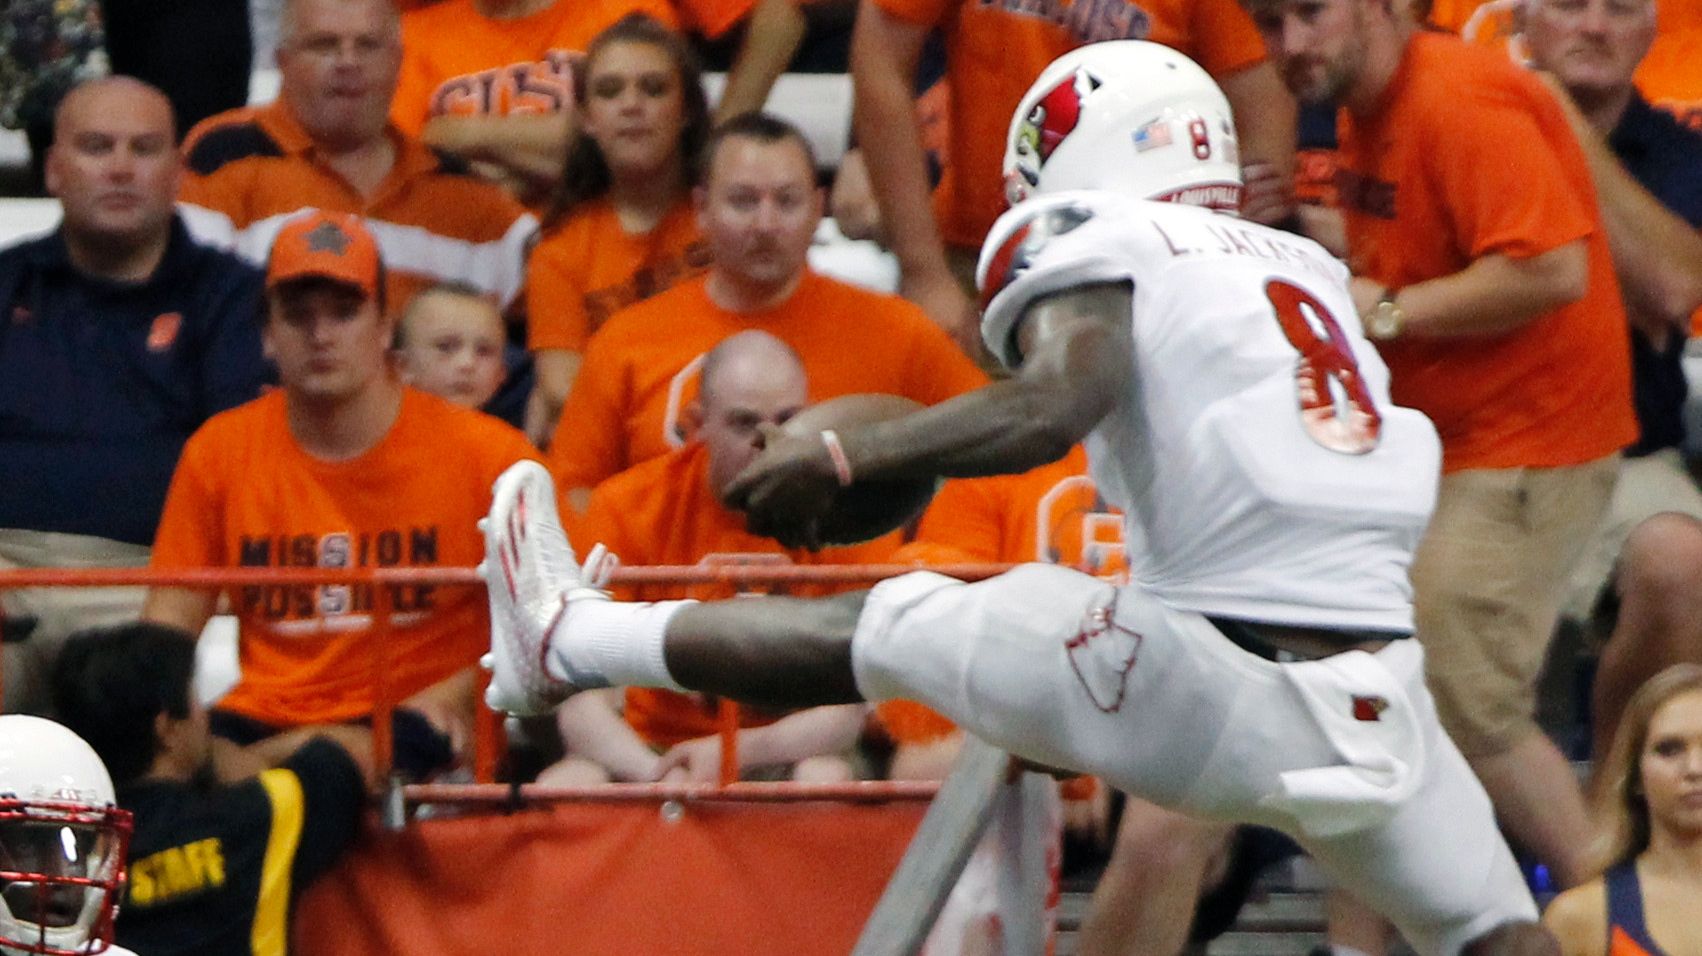 Everything you need to know about Louisville-Syracuse, Lamar Jackson Day, Sports